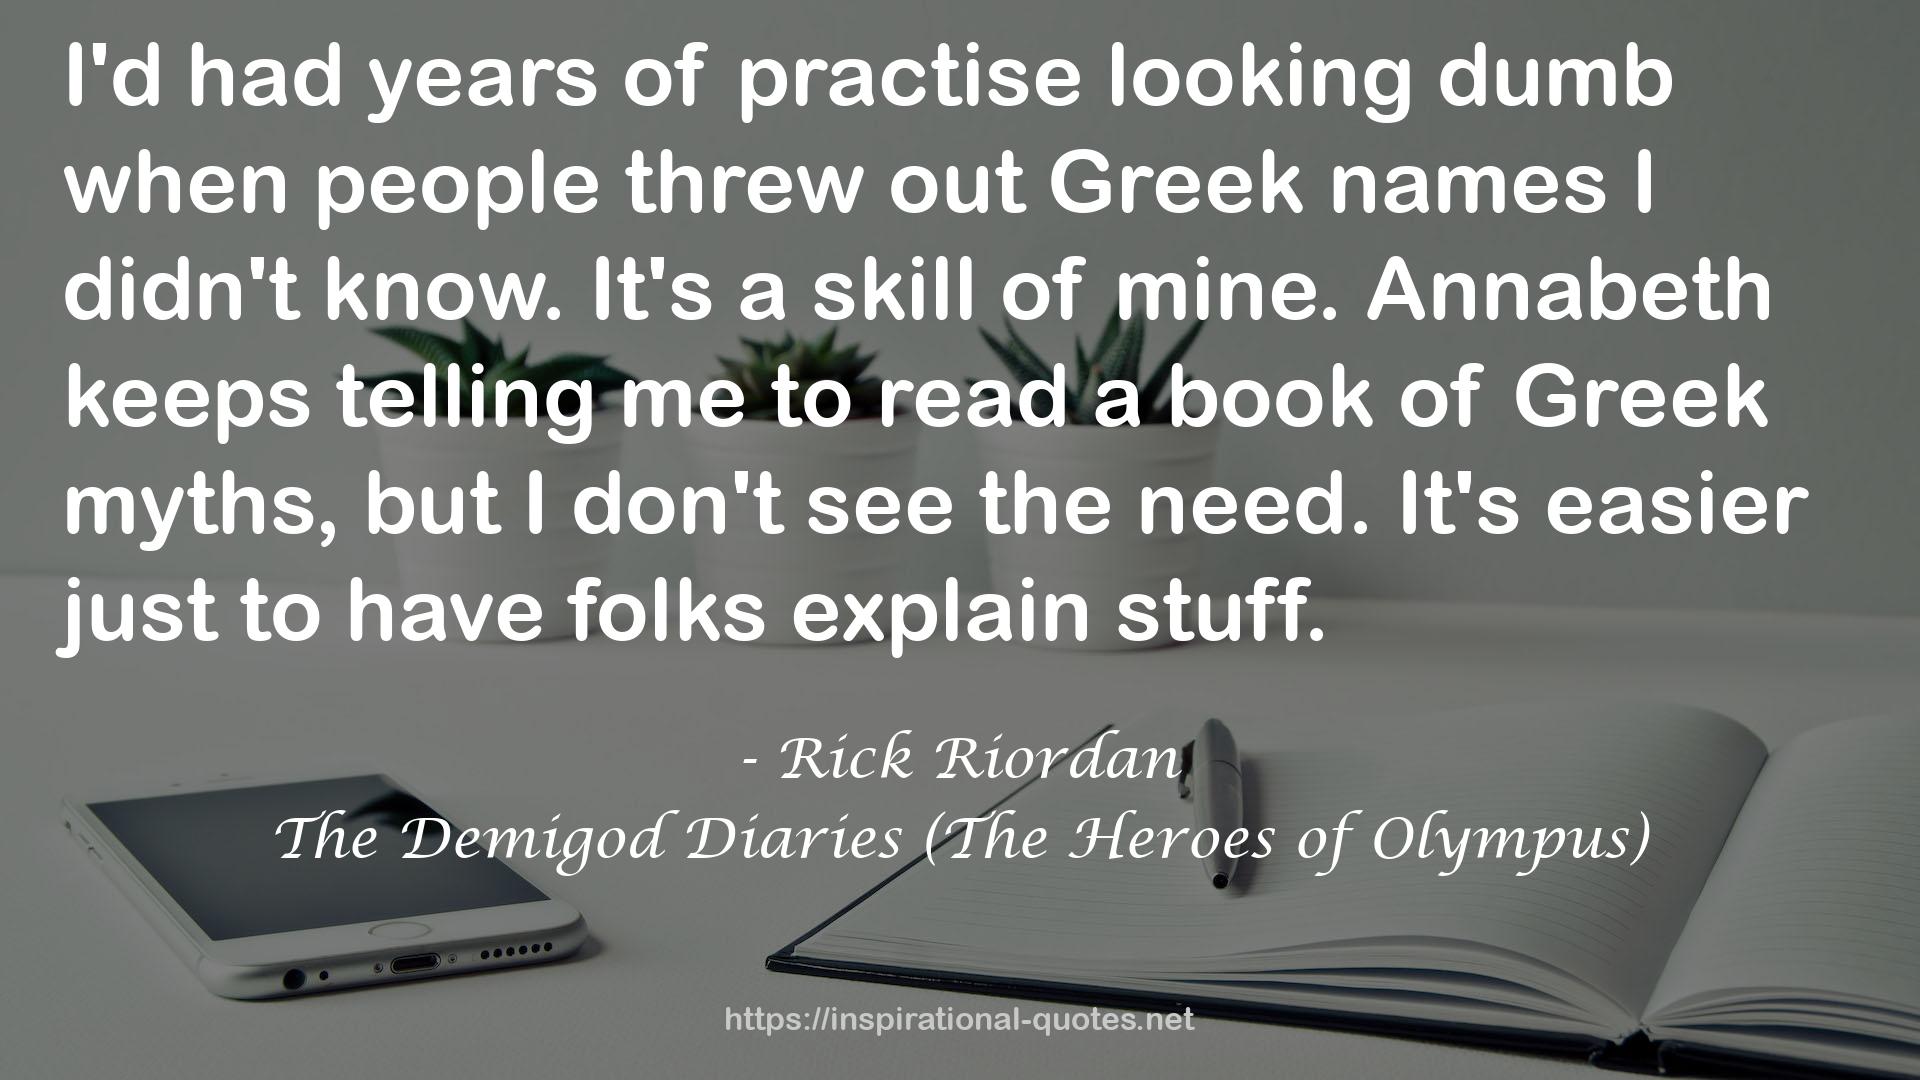 The Demigod Diaries (The Heroes of Olympus) QUOTES